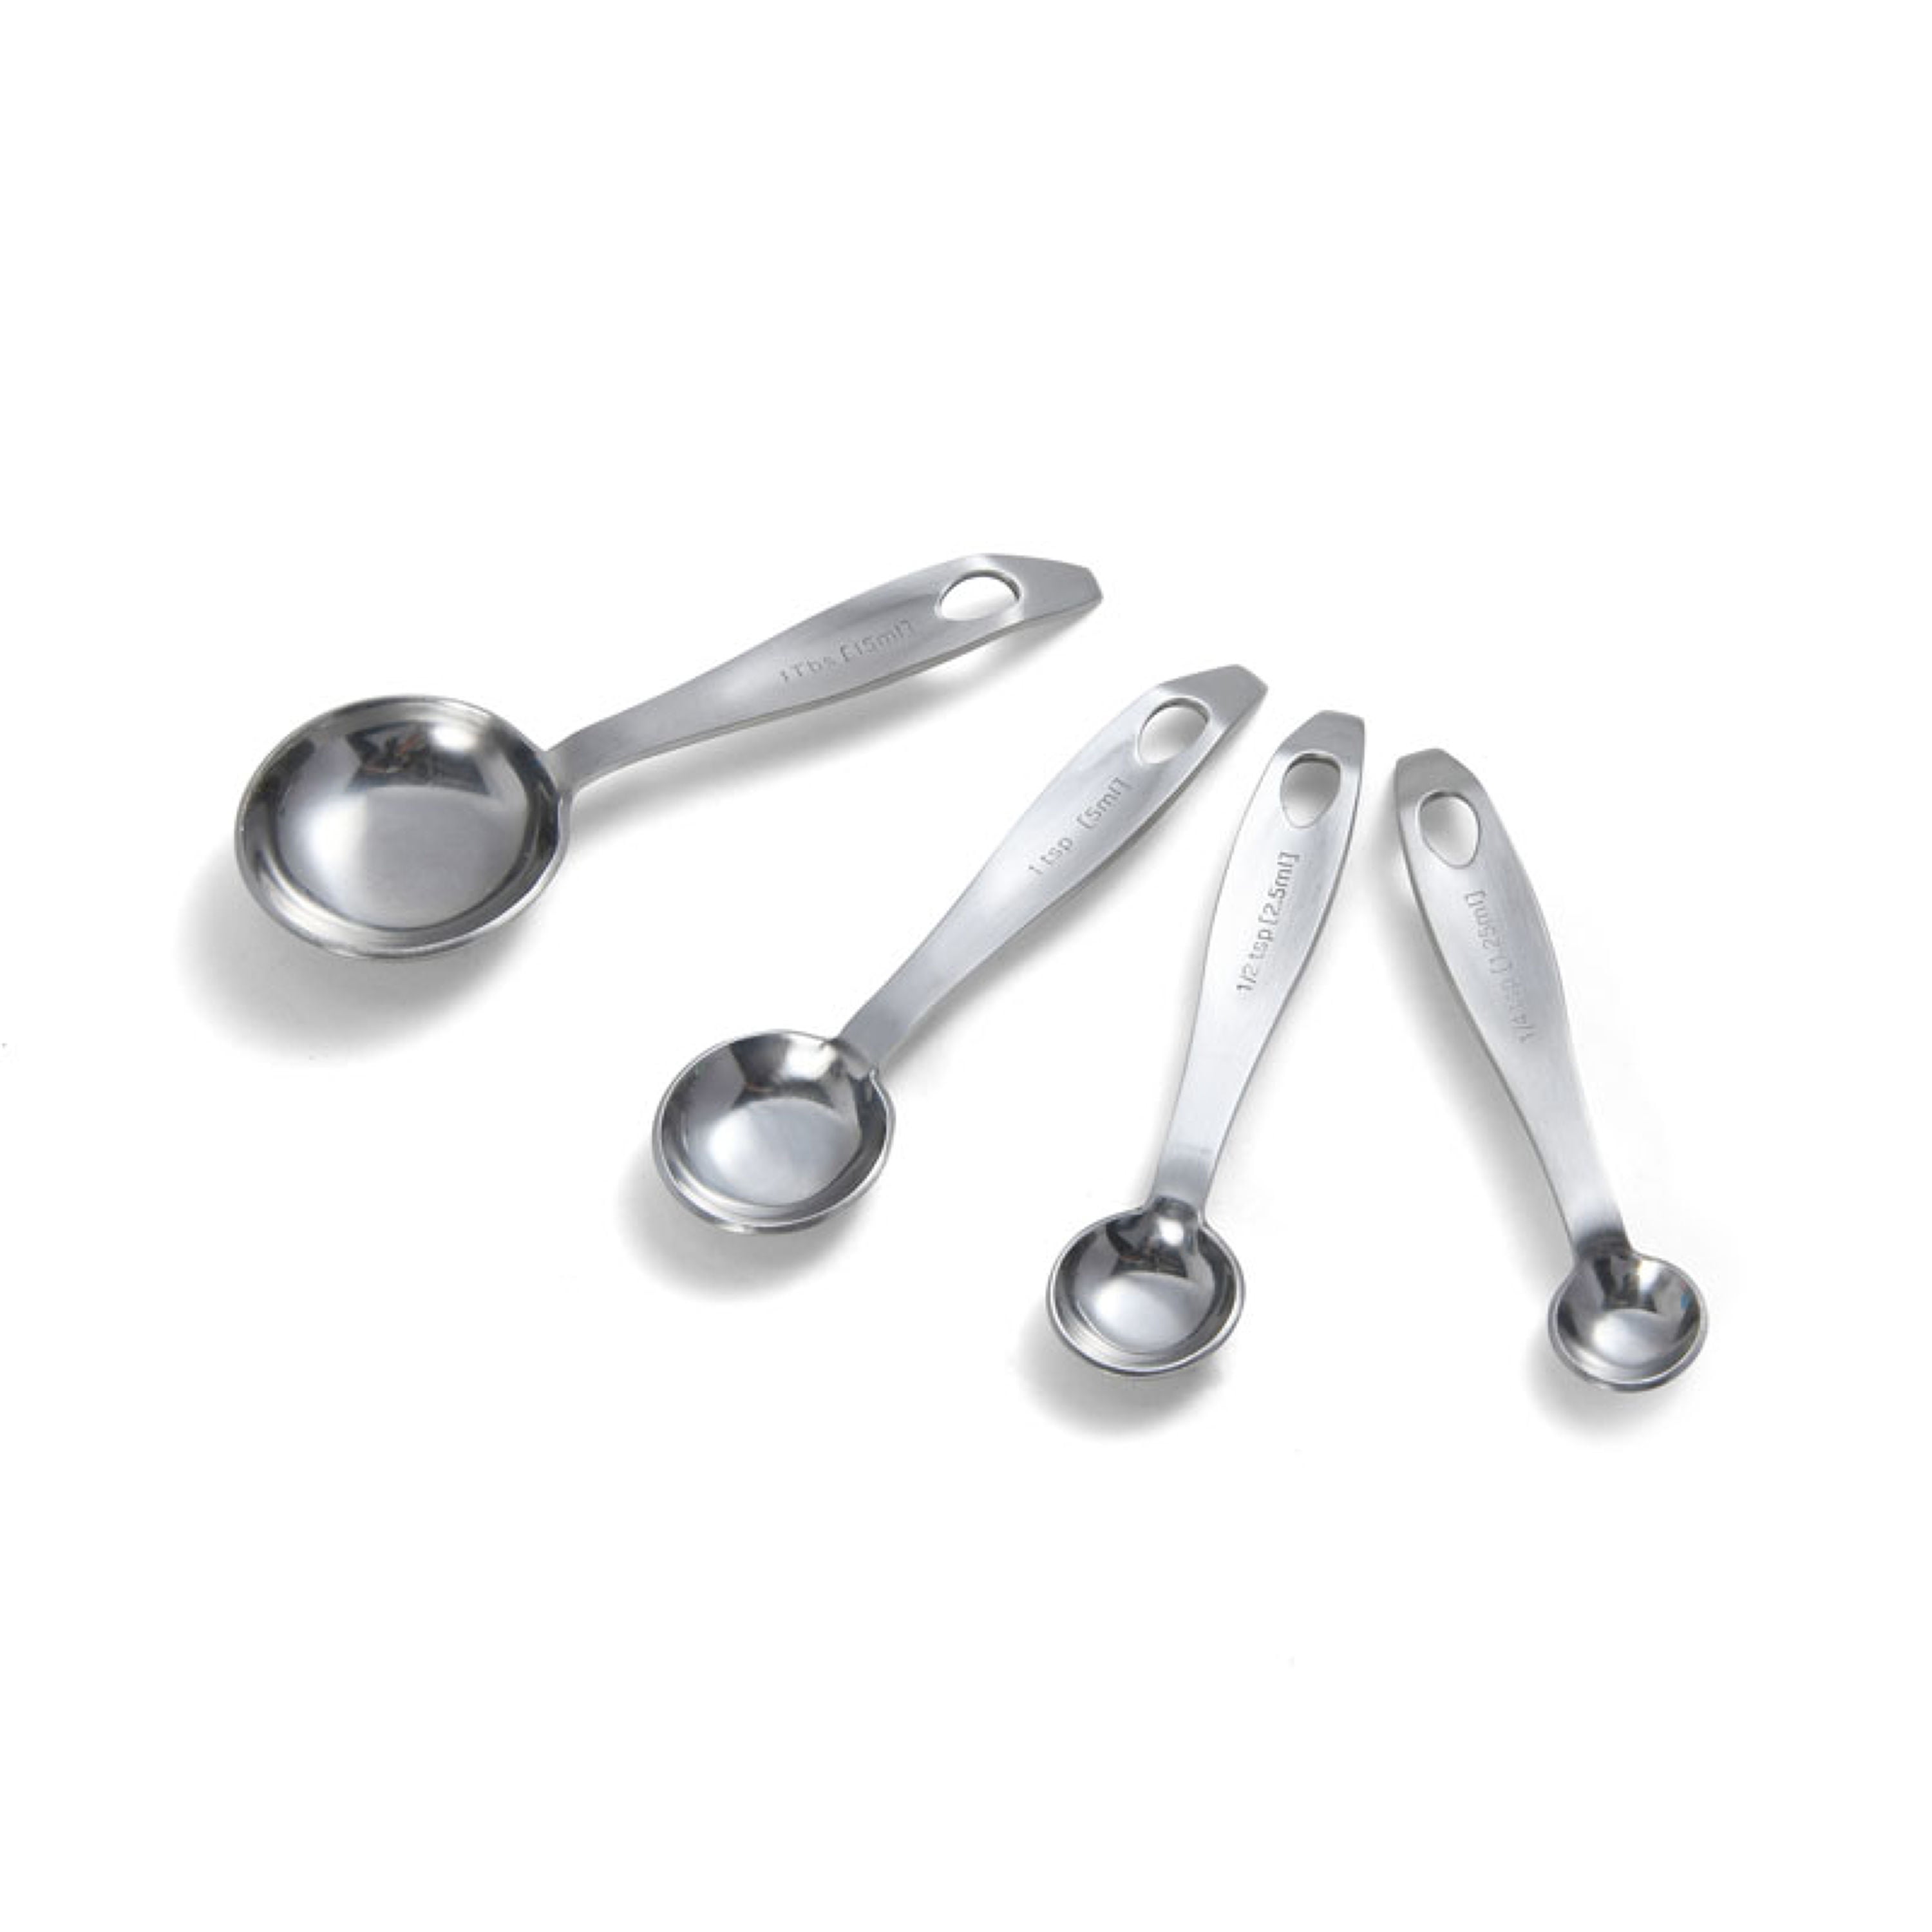  Amco Professional Performance Measuring Spoons, Set of 6